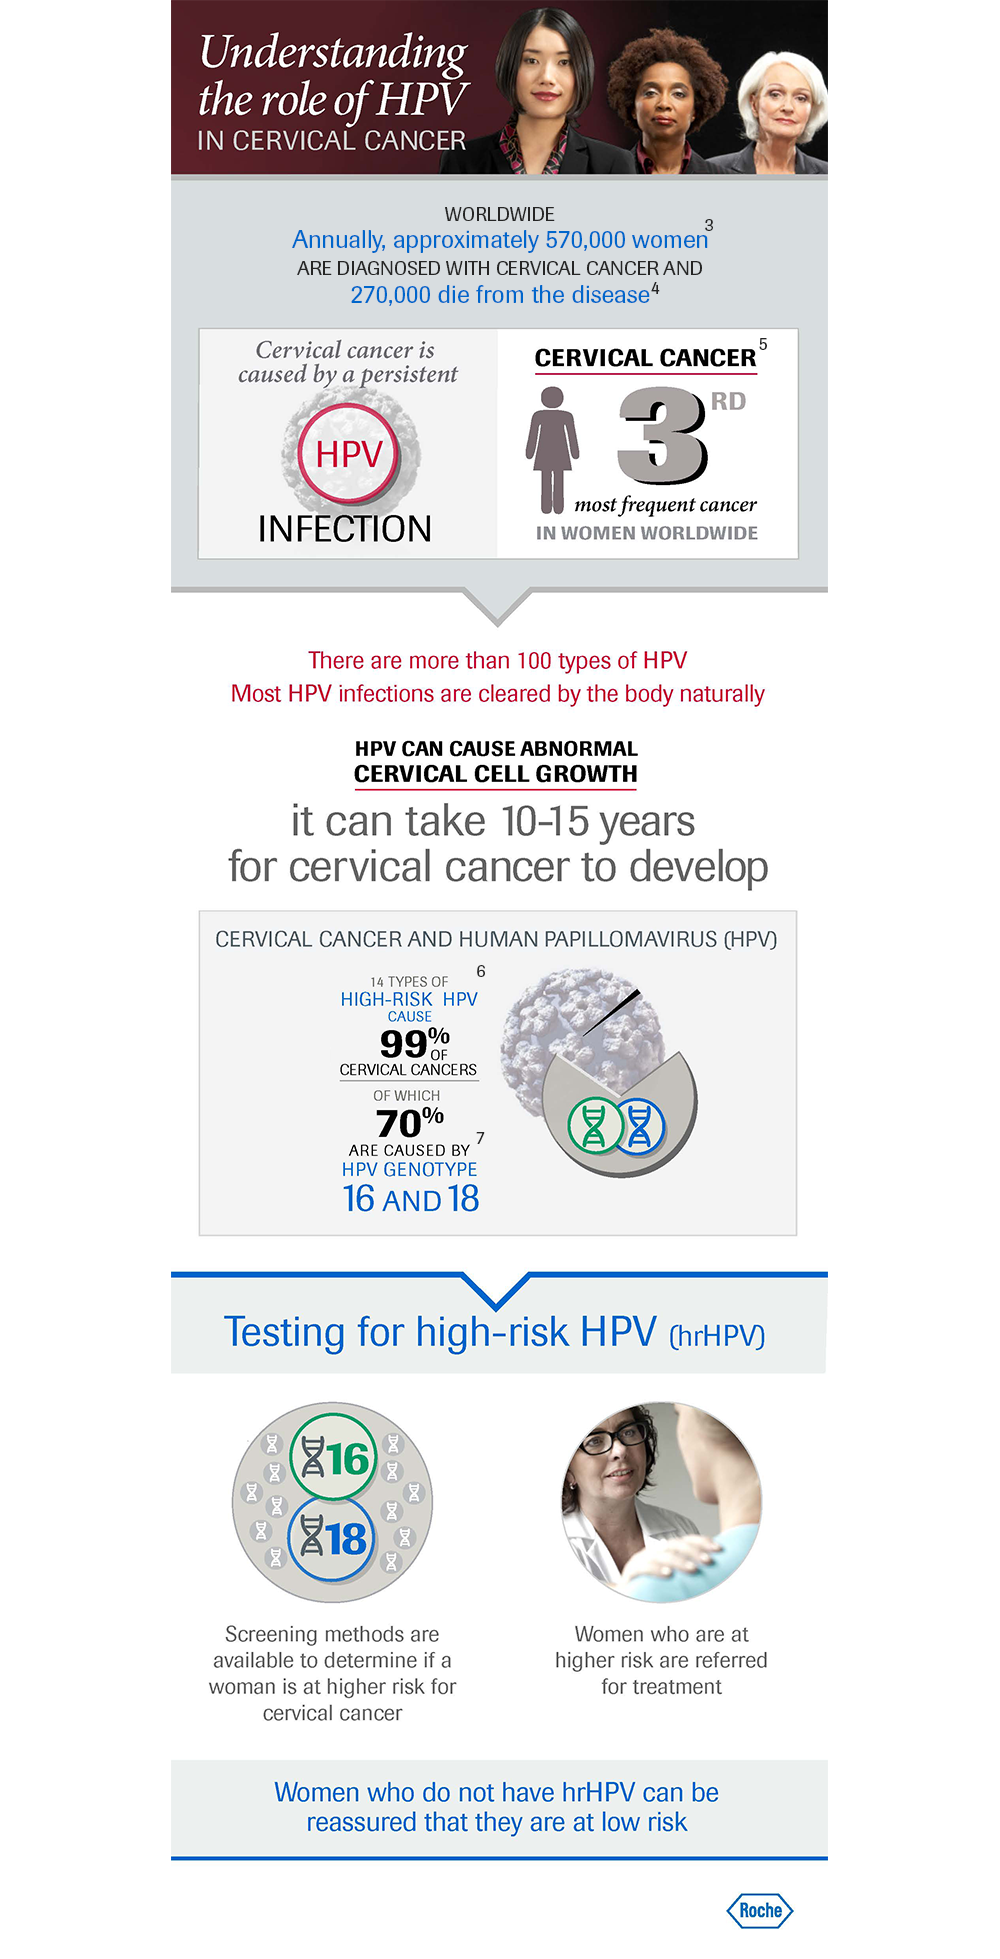 Hpv vaccine latest news - Hpv vaccine news, Hpv vaccine cancer rates